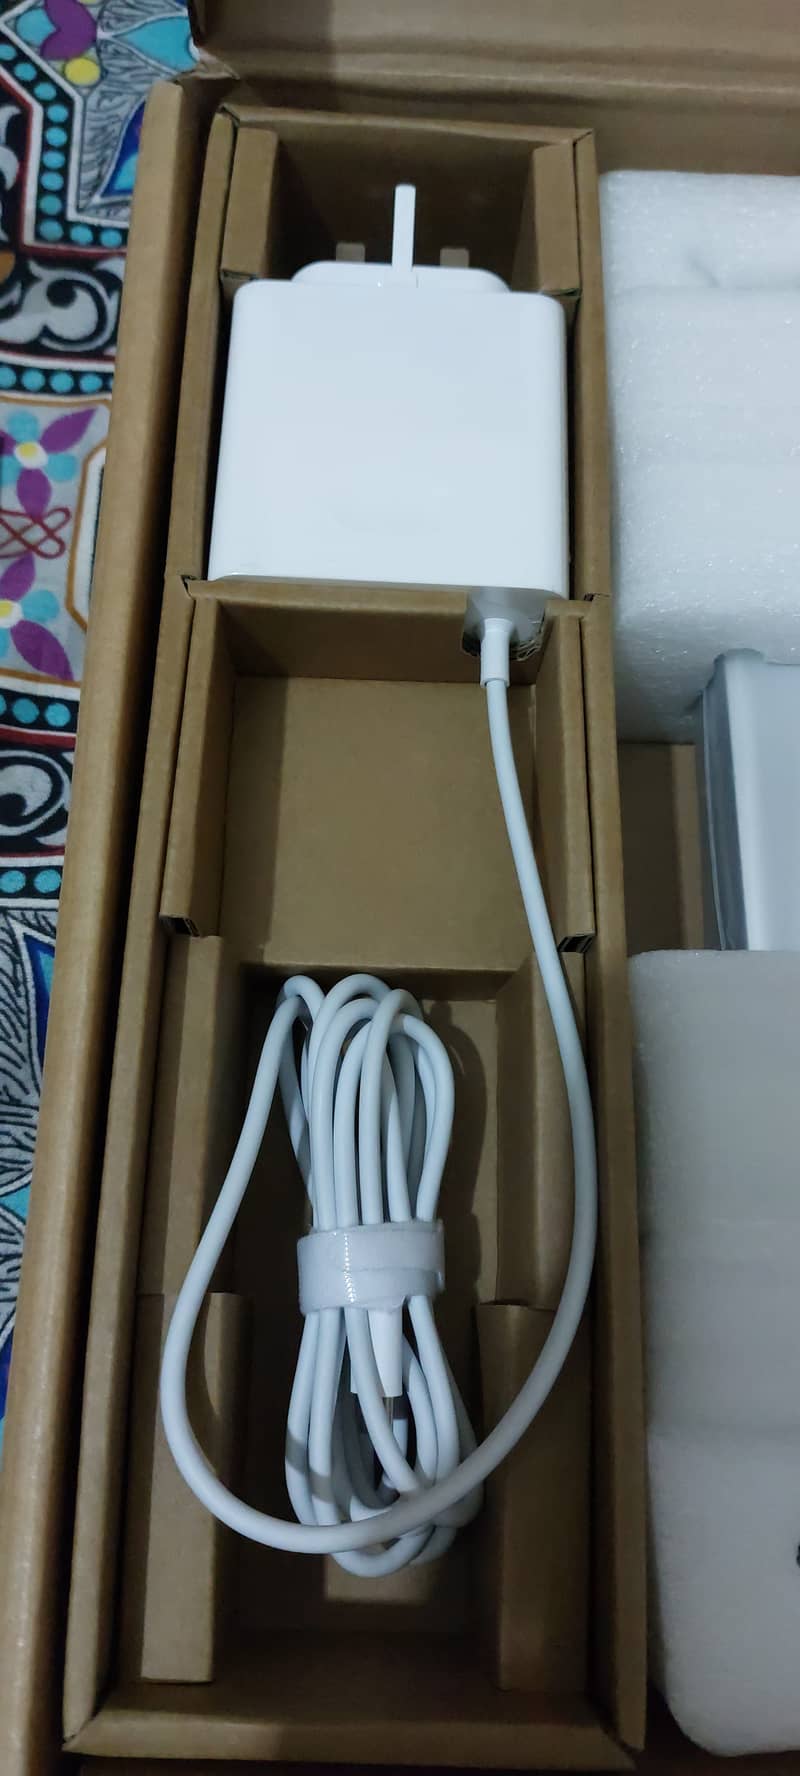 BRAND NEW HUAWEI MATEBOOK FOR SALE 3